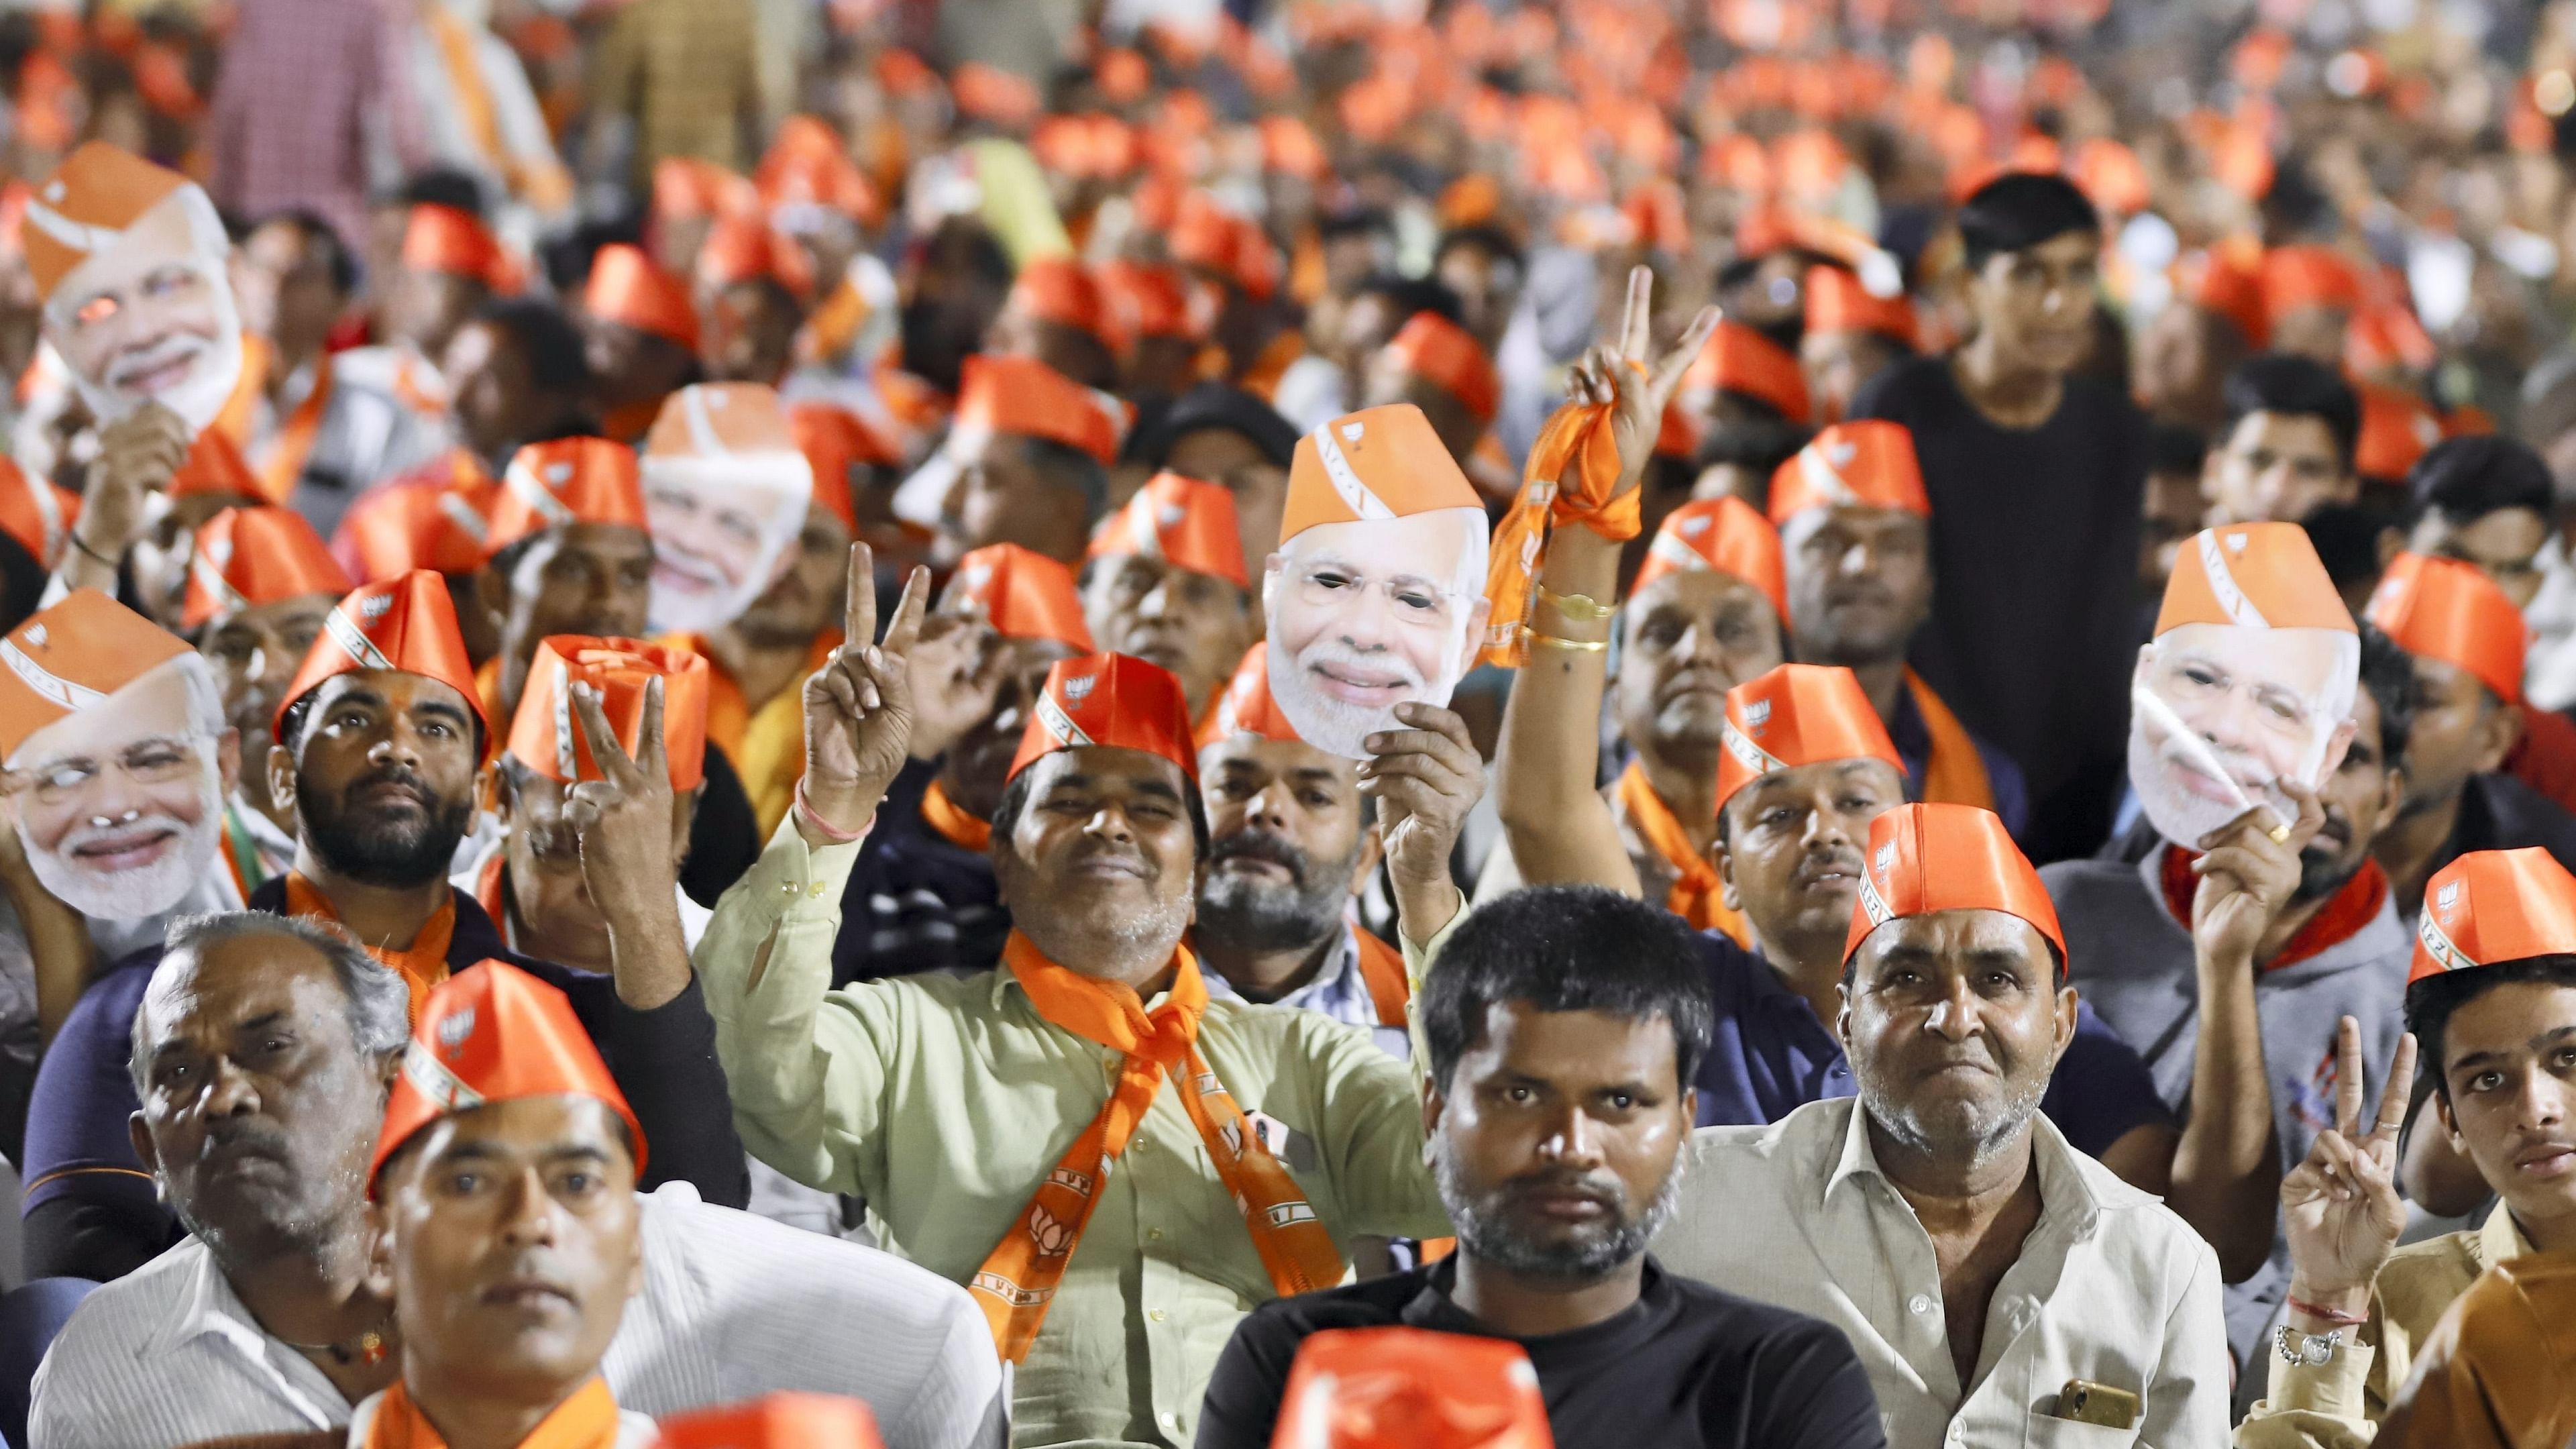 Supporters of BJP attend public meeting of Union Home Minister Amit Shah ahead of Gujarat Assembly election in Ahmedabad. Credit: PTI Photo